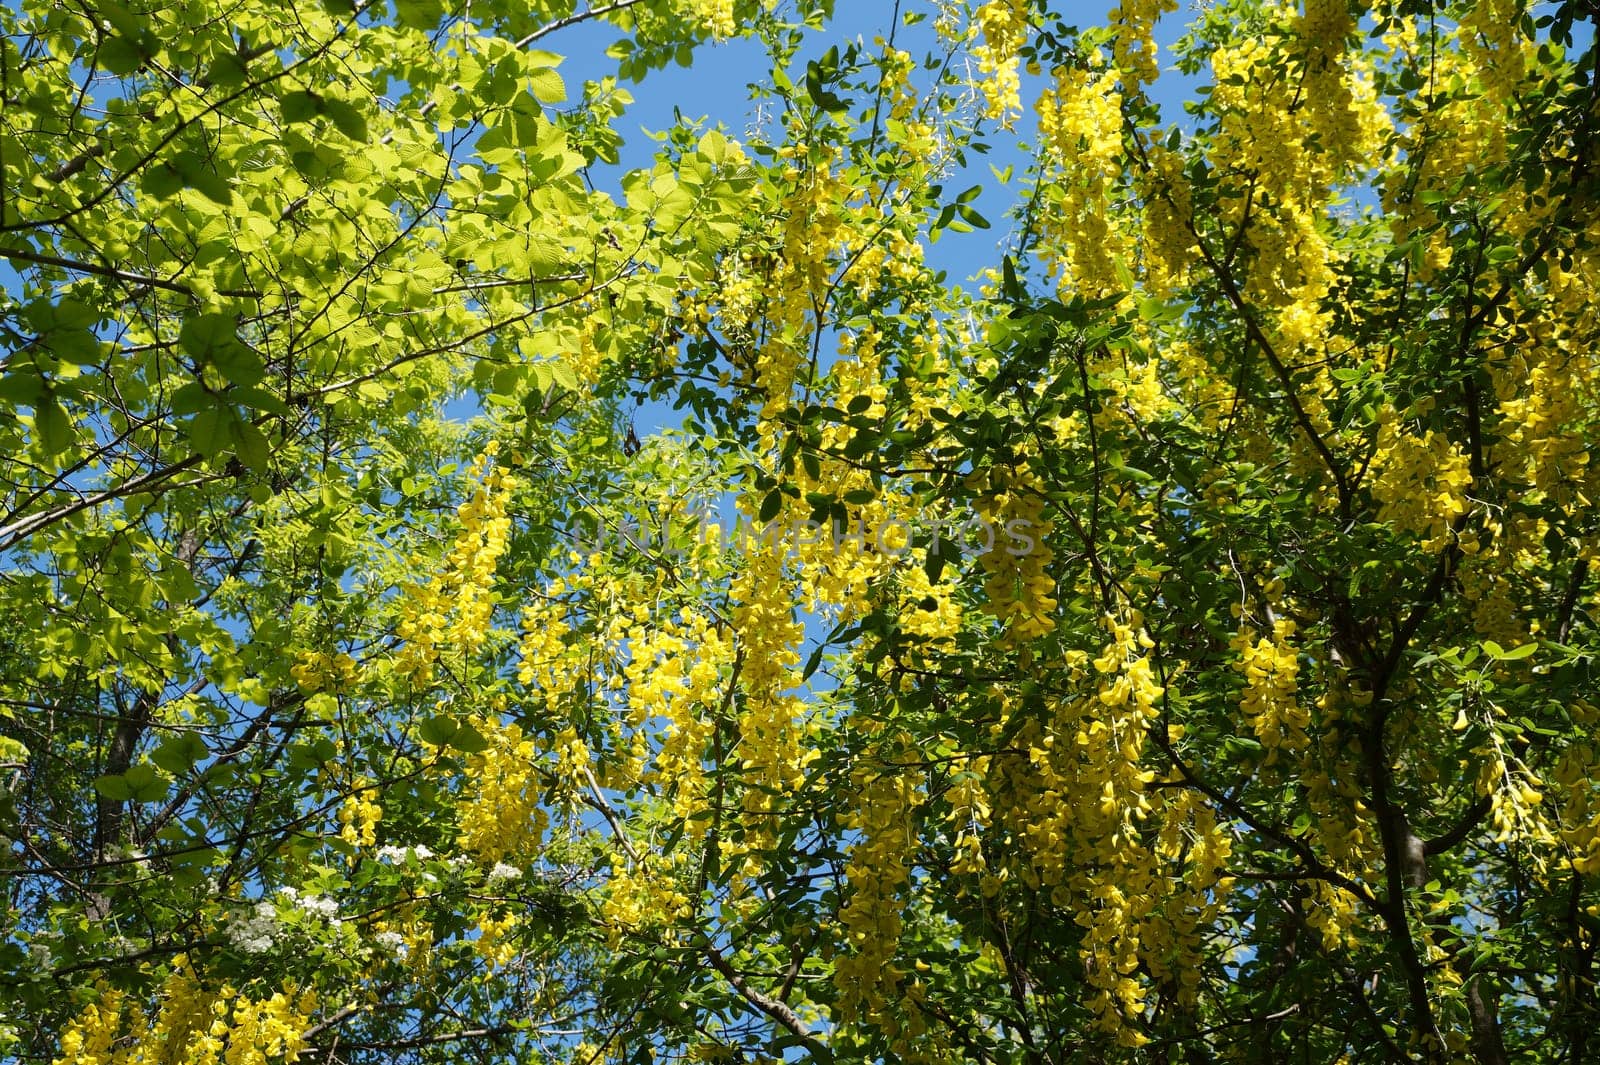 Yellow blooming acacia in sunlight against blue sky.